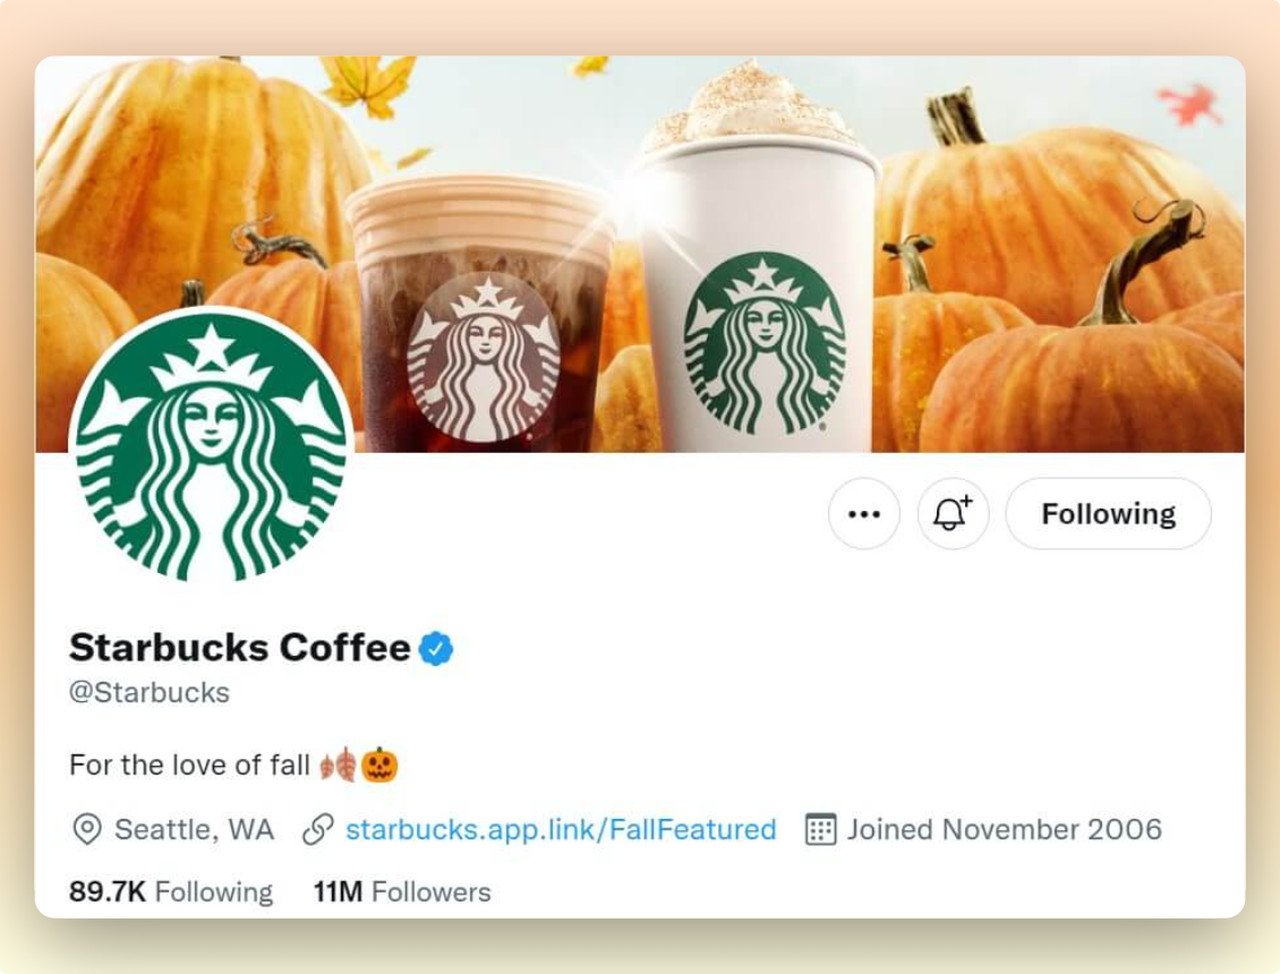 a screenshot of Starbucks Twitter cover showing the drink with Halloween pumpkins and decorations as a marketing campaign idea